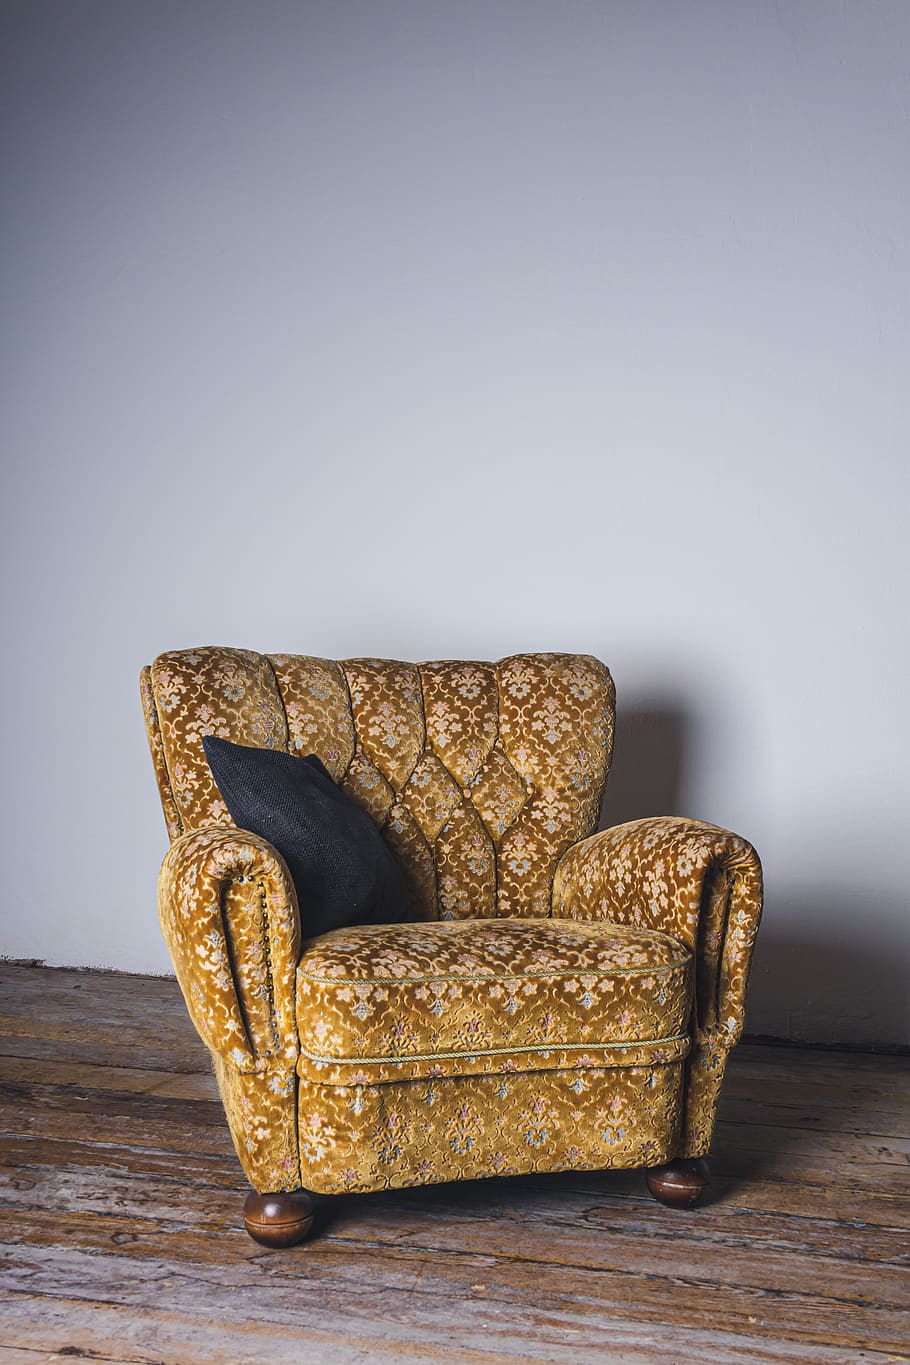 chair, pillow, furniture, design, comfortable, relax, wood floor, shabby, nostalgia, vintage